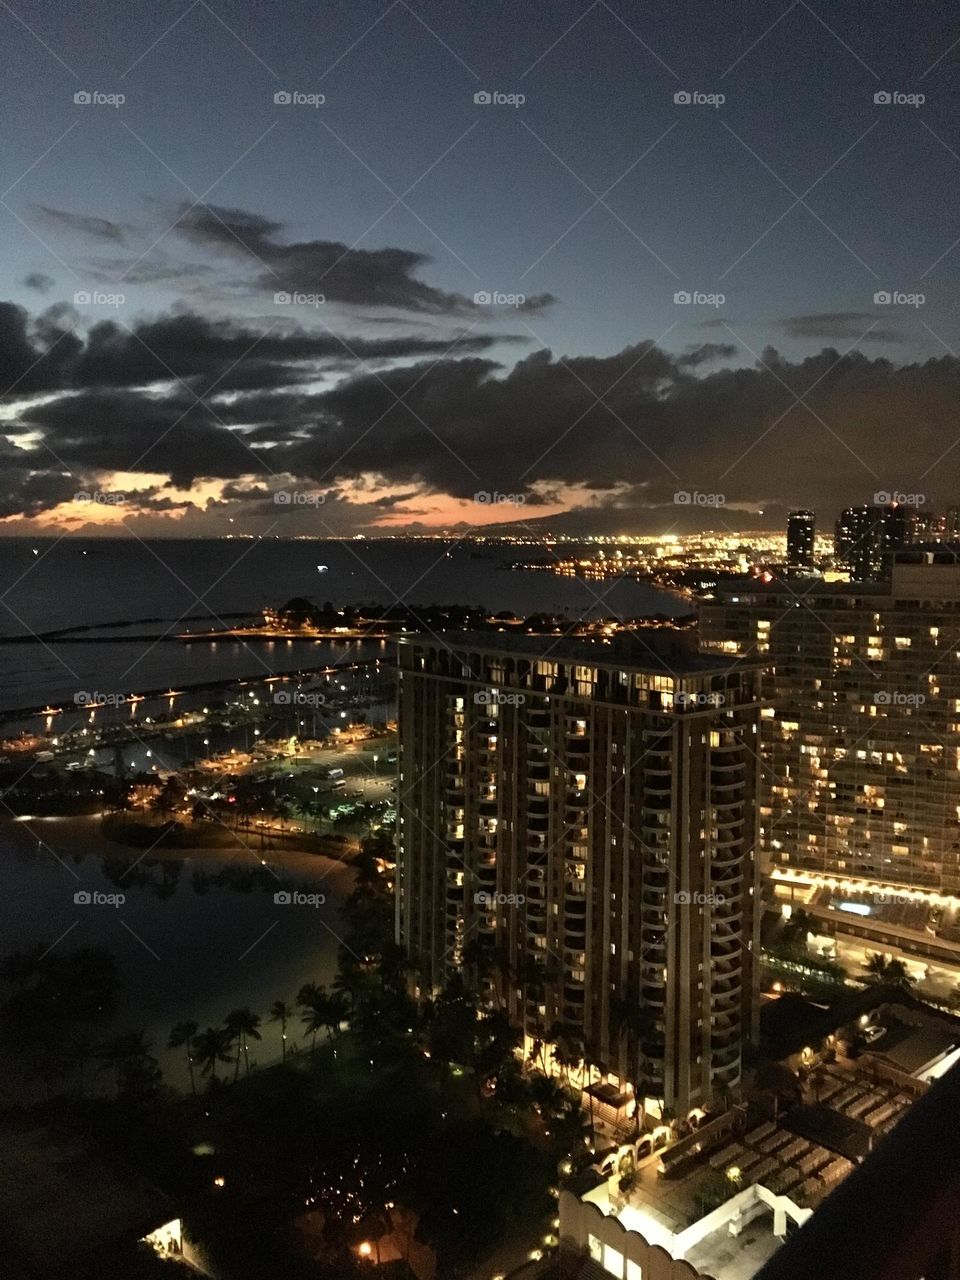 Honolulu Waikiki Hawaii just after sunset.  City lights, night life in tropical paradise.  Large billowing black clouds cover the last pieces of the sun over the ocean